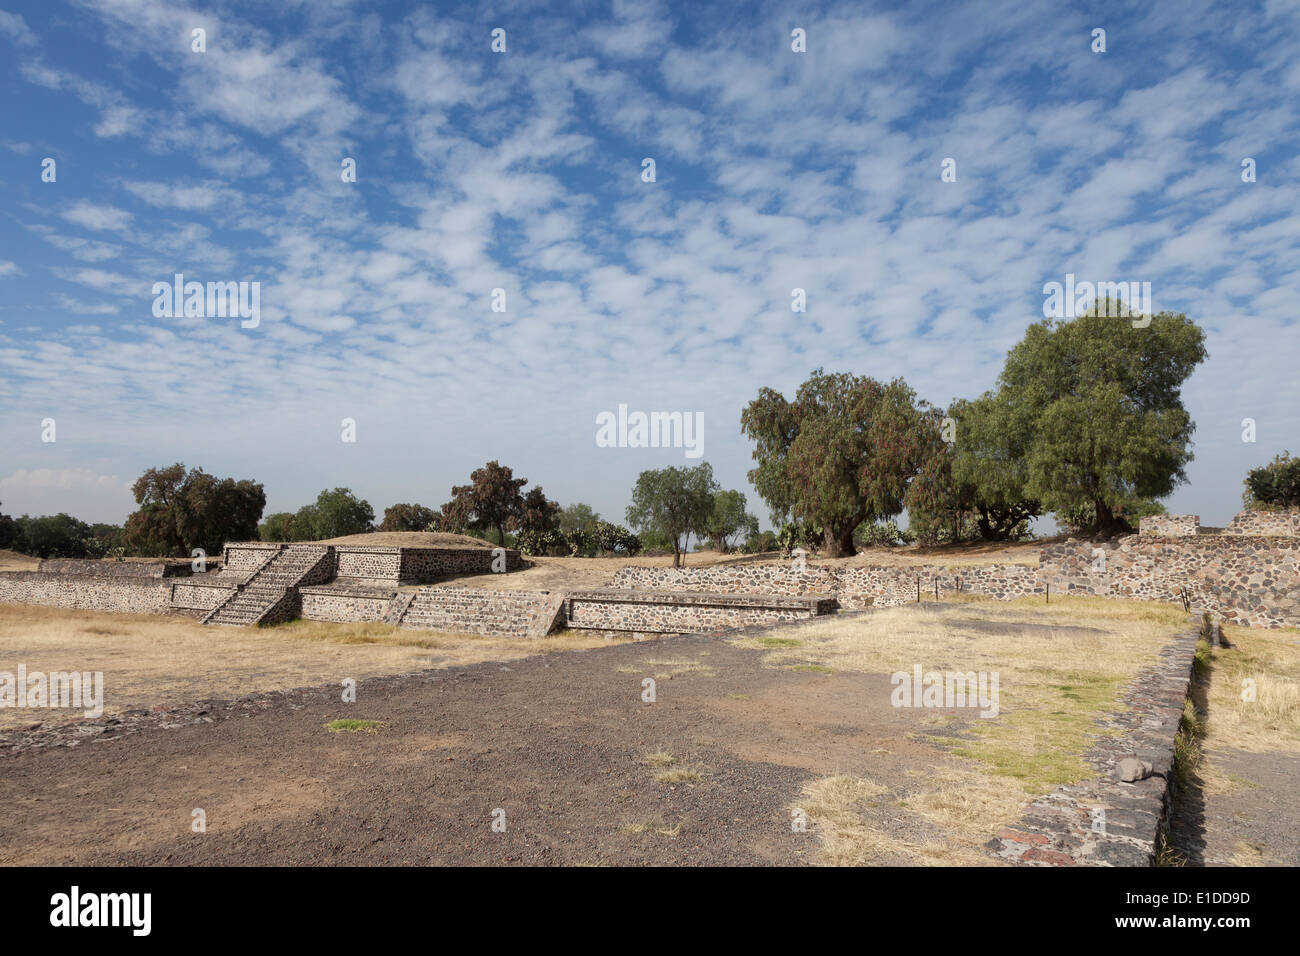 View along the Avenue of the Dead in Teotihuacan - San Juan Teotihuacán, State of Mexico, Mexico Stock Photo